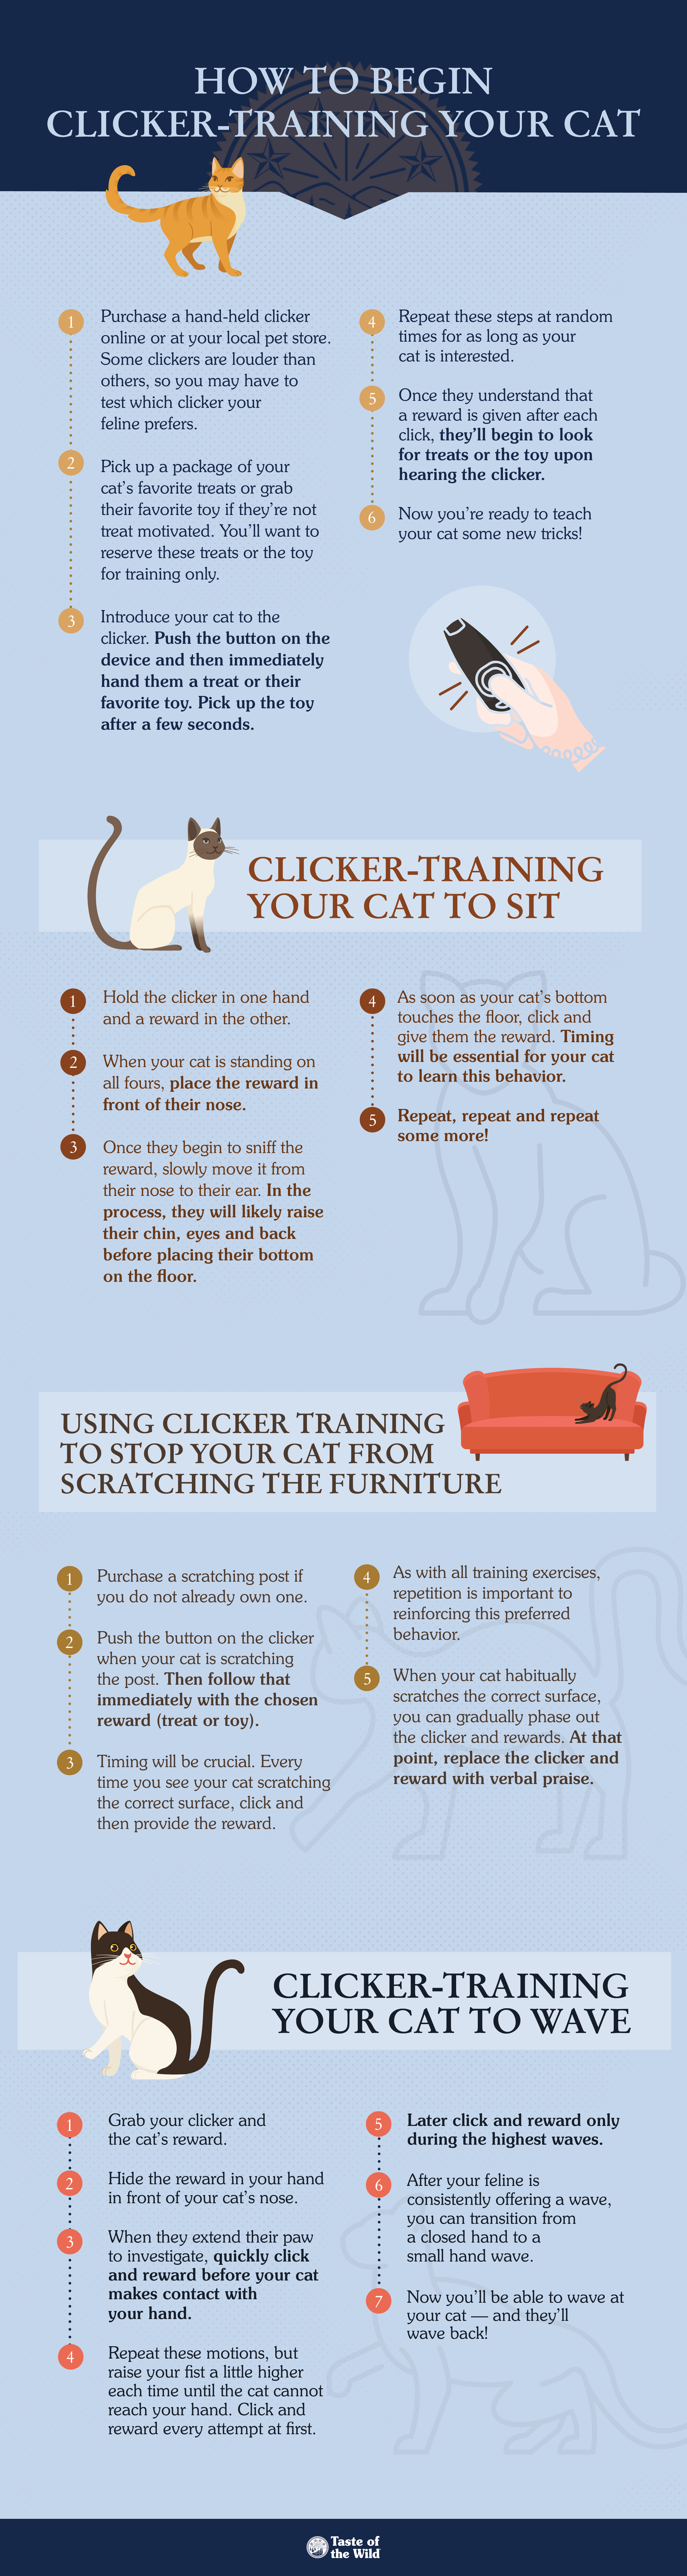 How to Begin Clicker Training Your Cat Info Graphic | Taste of the Wild